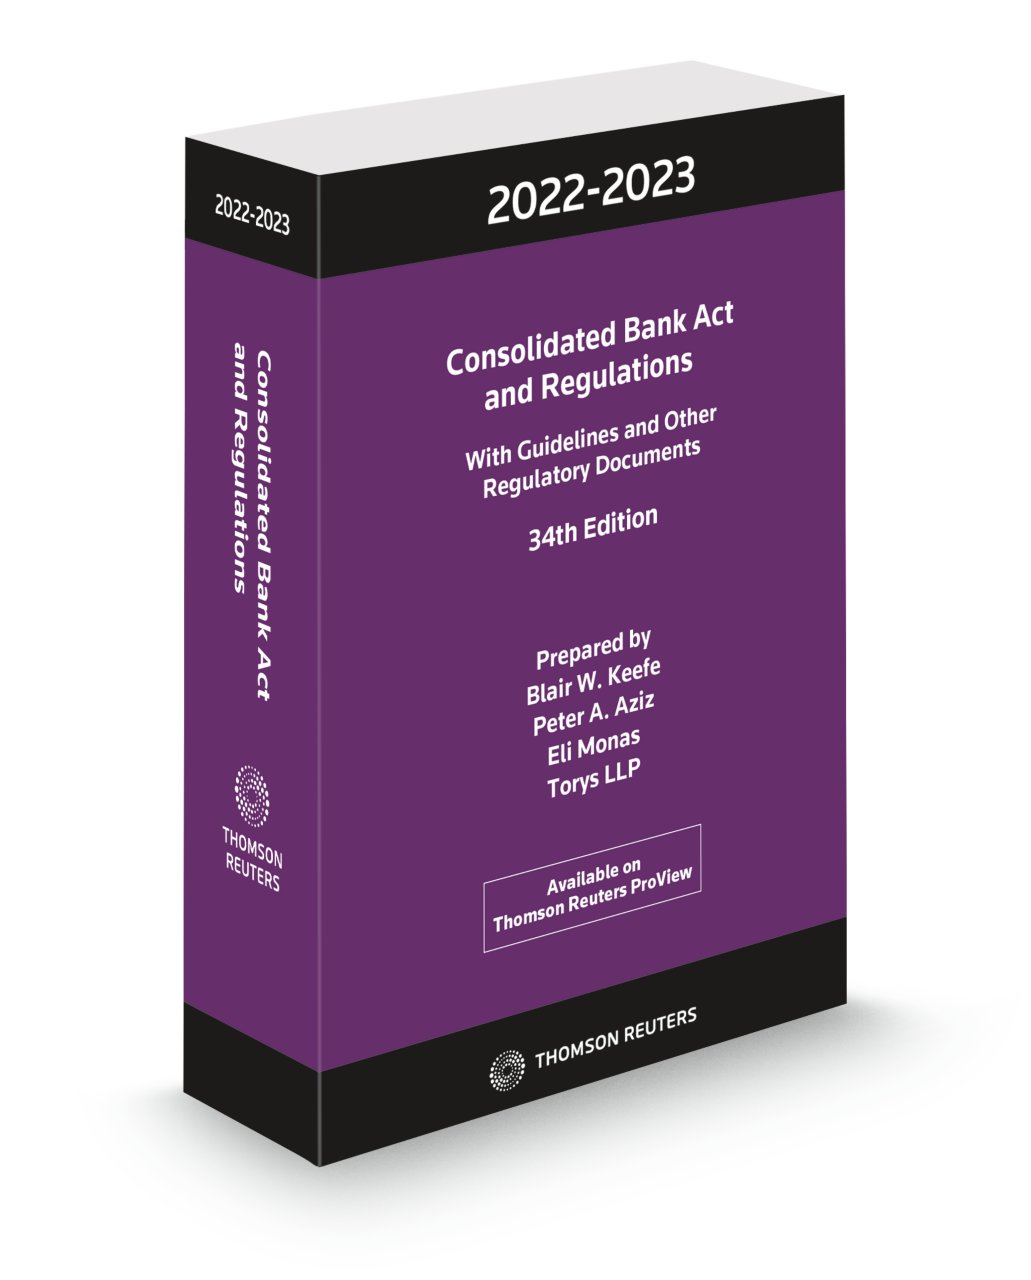 Thomson　Print　Act　2022-2023,　and　and　eBook　ProView　Regulations　34th　Edition,　Reuters　Consolidated　Bank